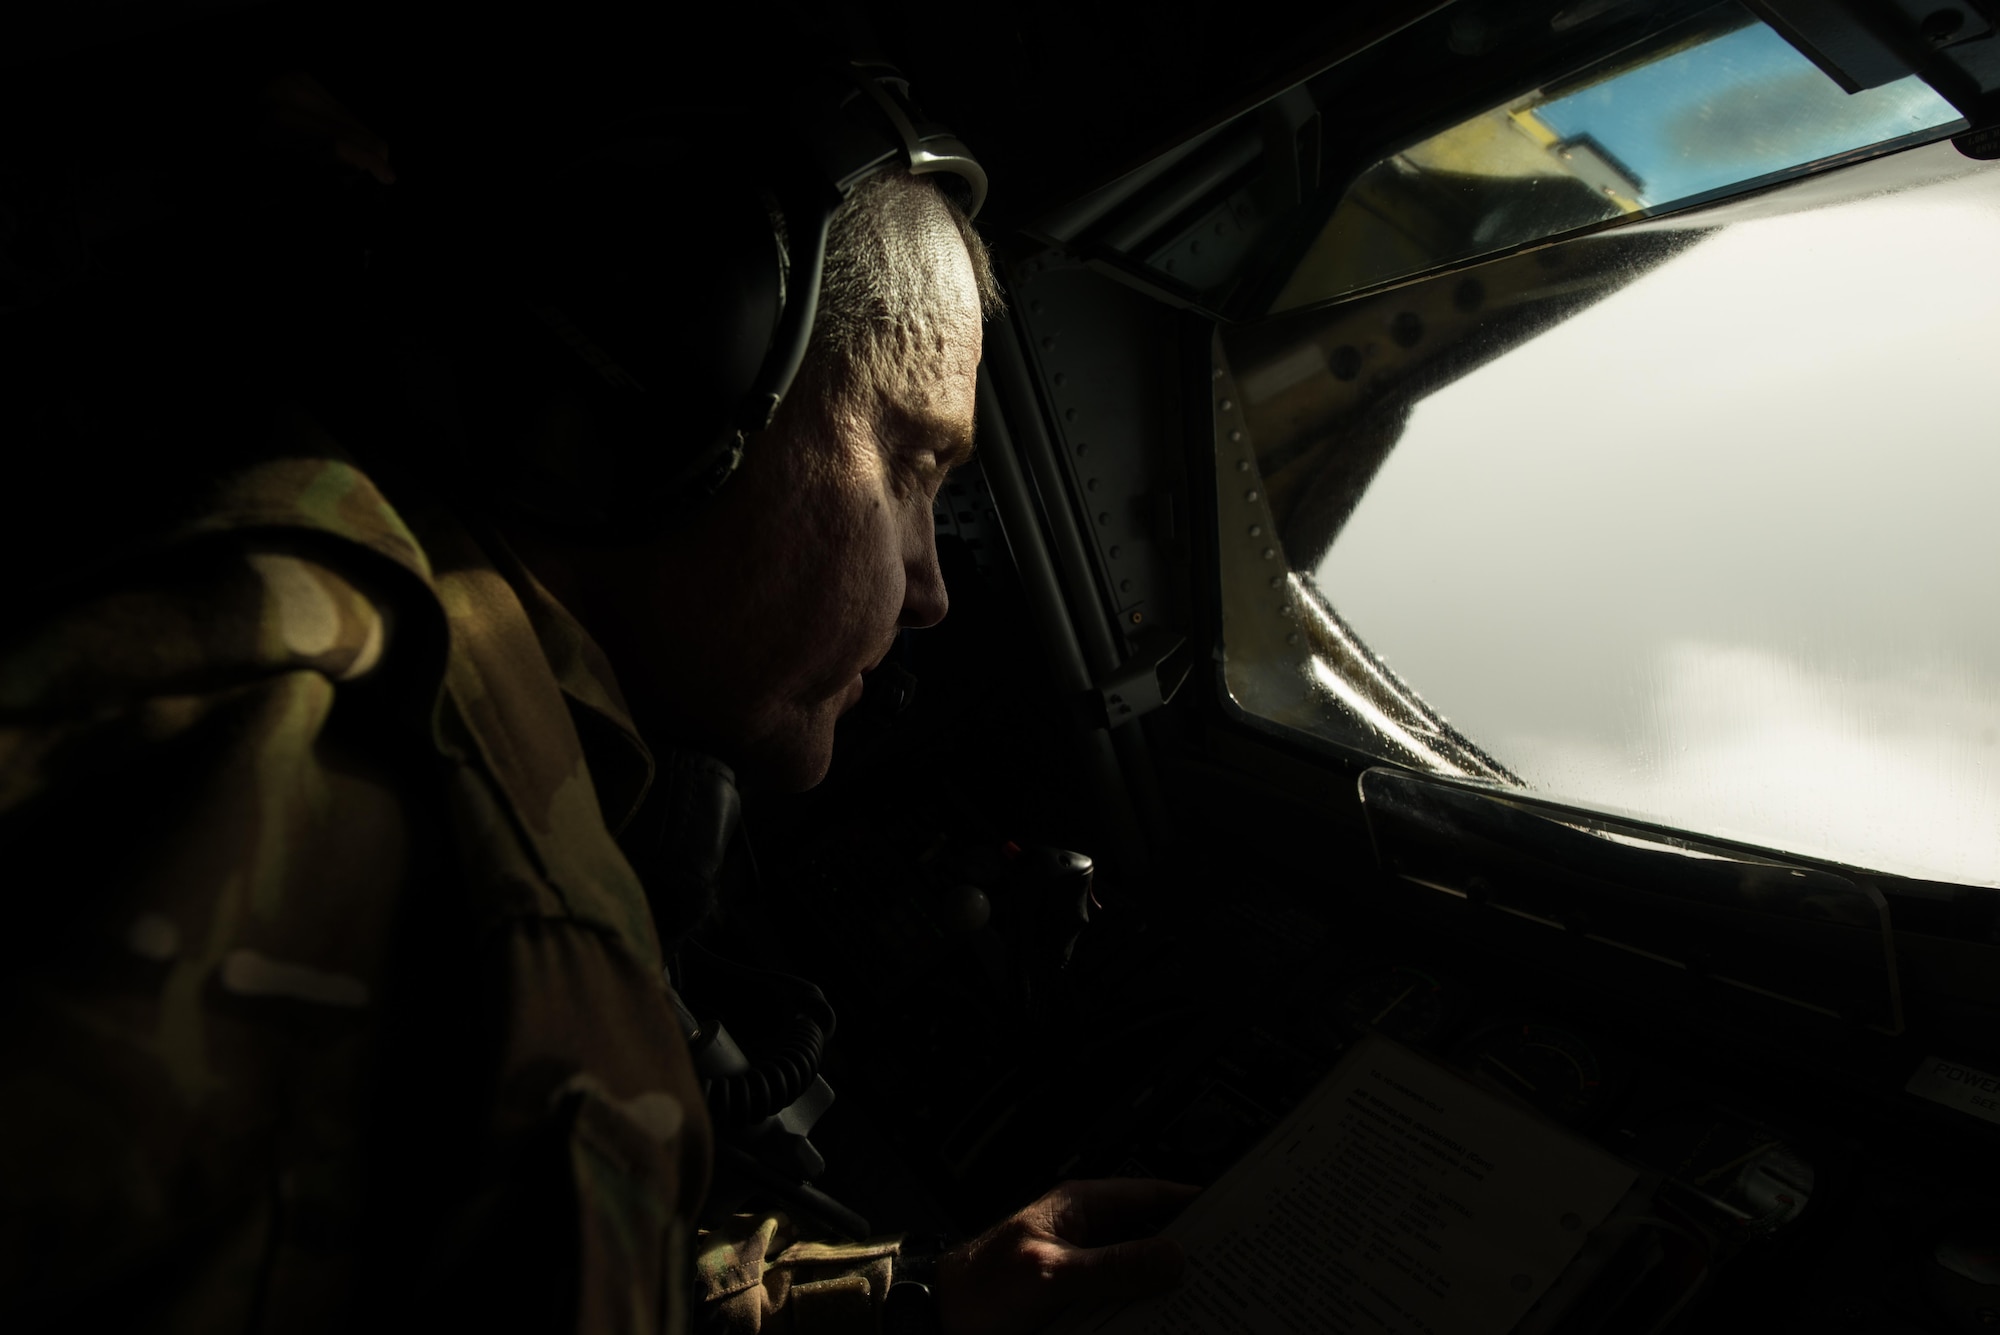 Senior Master Sgt.  Barry, 340th Expeditionary Air Refueling Squadron boom operator, looks out a boom pod window after refueling aircraft over Iraq September 16, 2015. (U.S. Air Force photo/Staff Sgt. Alexandre Montes)  